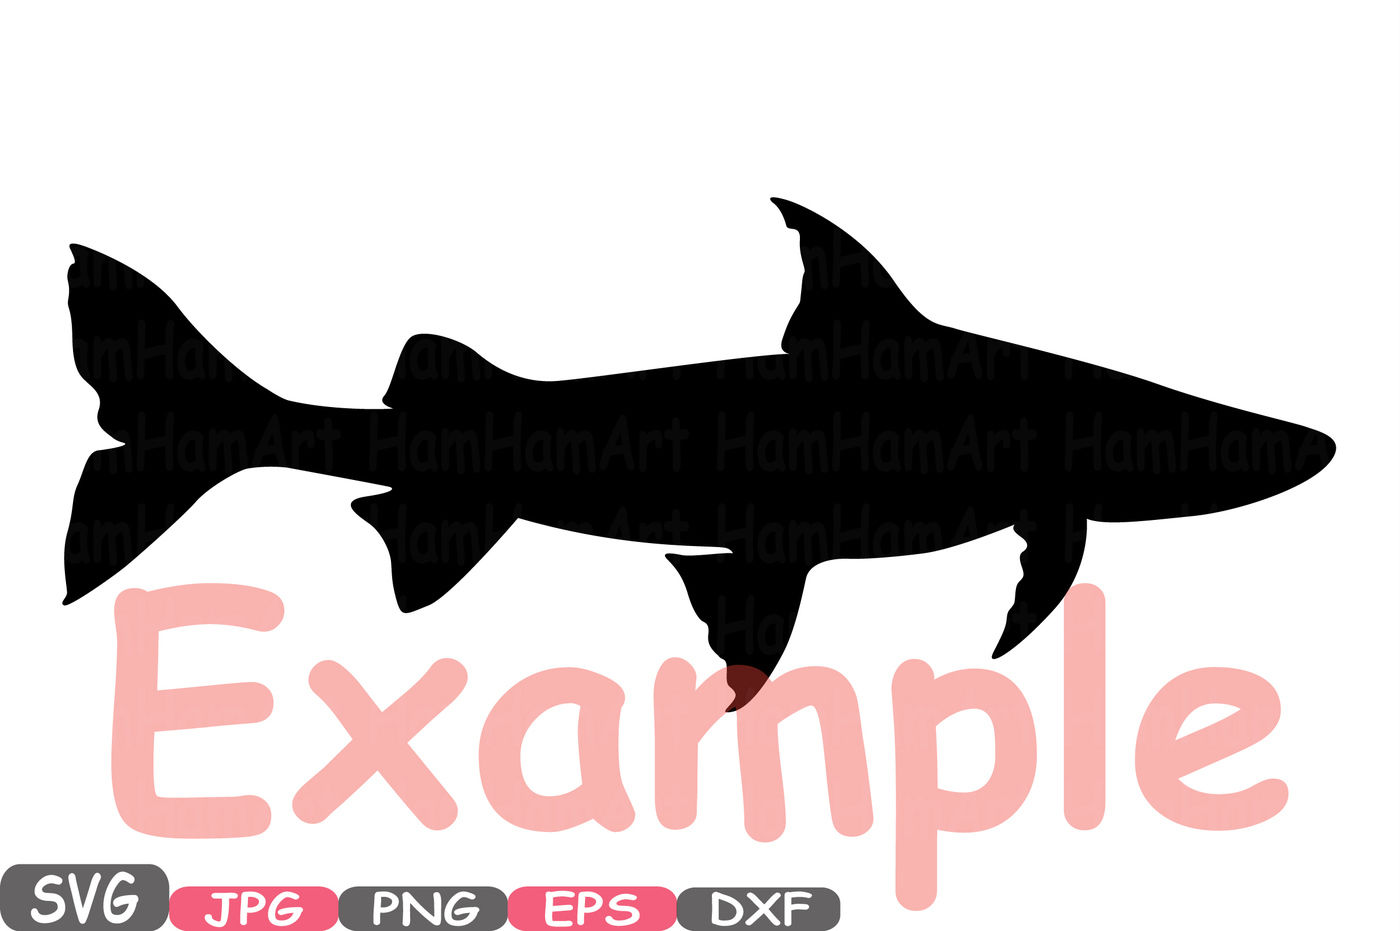 ori 72807 beee7c02624d4fccb47d81f6d0fc950edbe0b39a fish monogram svg silhouette cutting files fishing svg bundle vinyl design fisherman pike ocean fly fishing best catch t shirt trout 595s